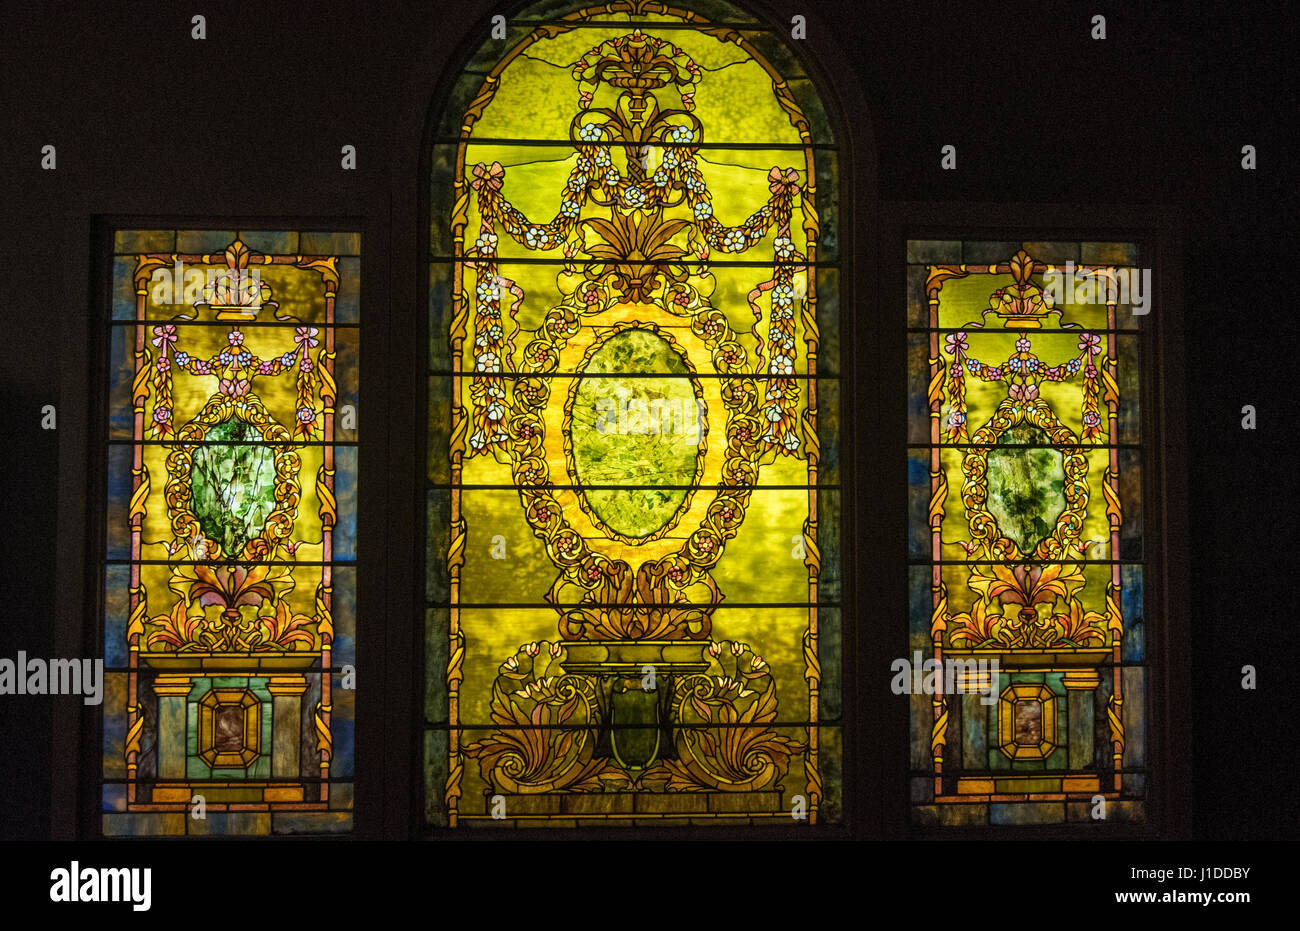 Winter Park Florida Charles Hosmer Morse Museum of American Art Tiffany stained glass museum Stock Photo